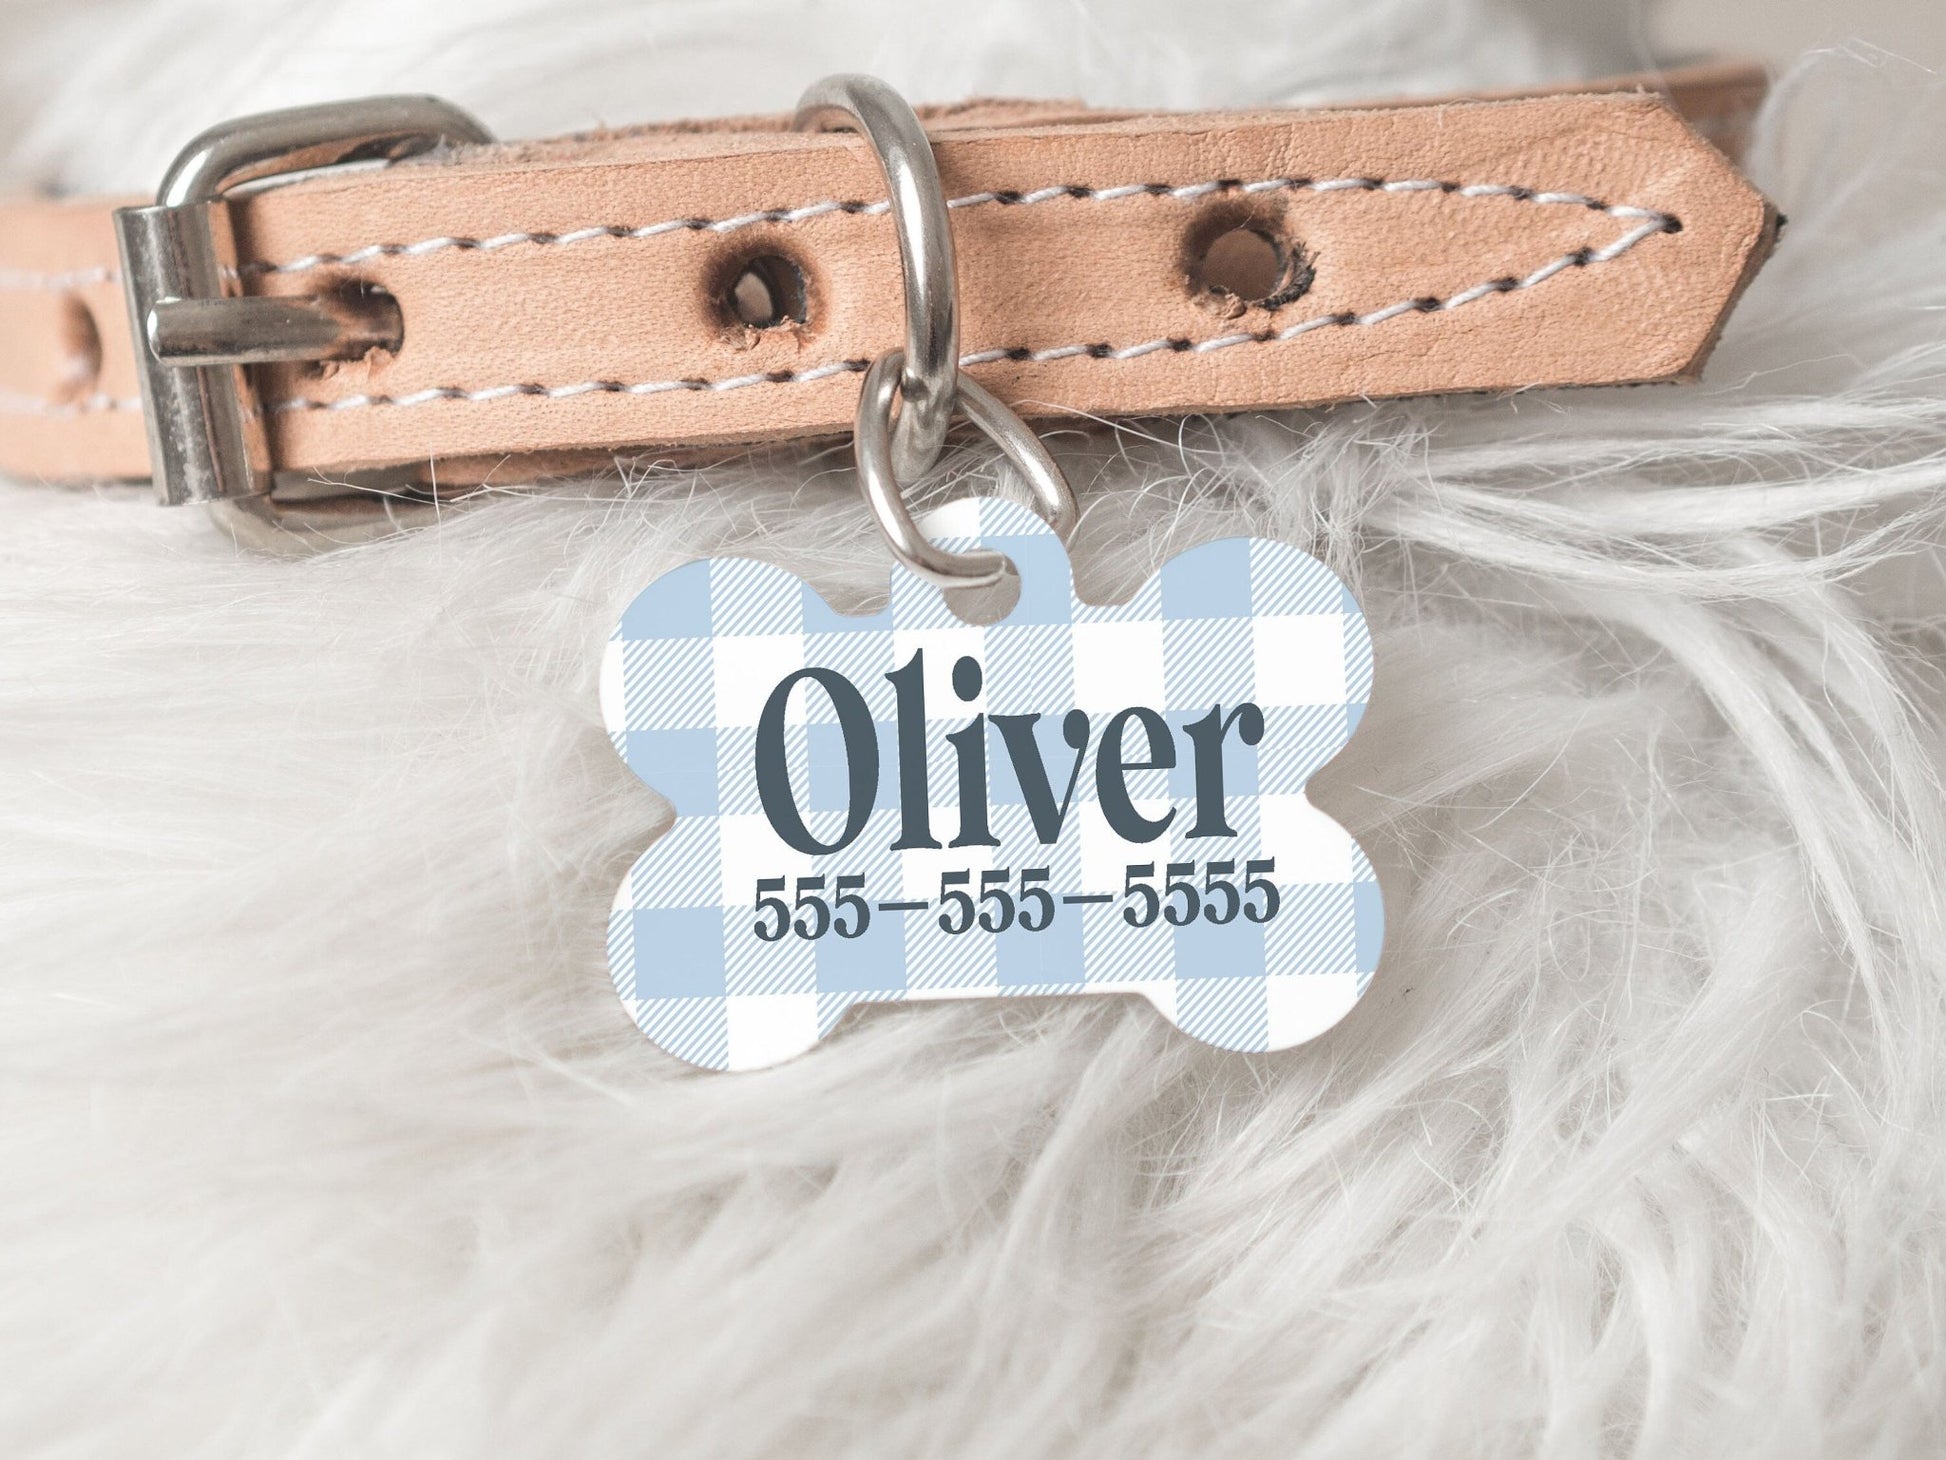 Plaid Gingham Dog Tags Custom with Name and Phone Number Dog ID Tag Pet Collar Tag - Squishy Cheeks